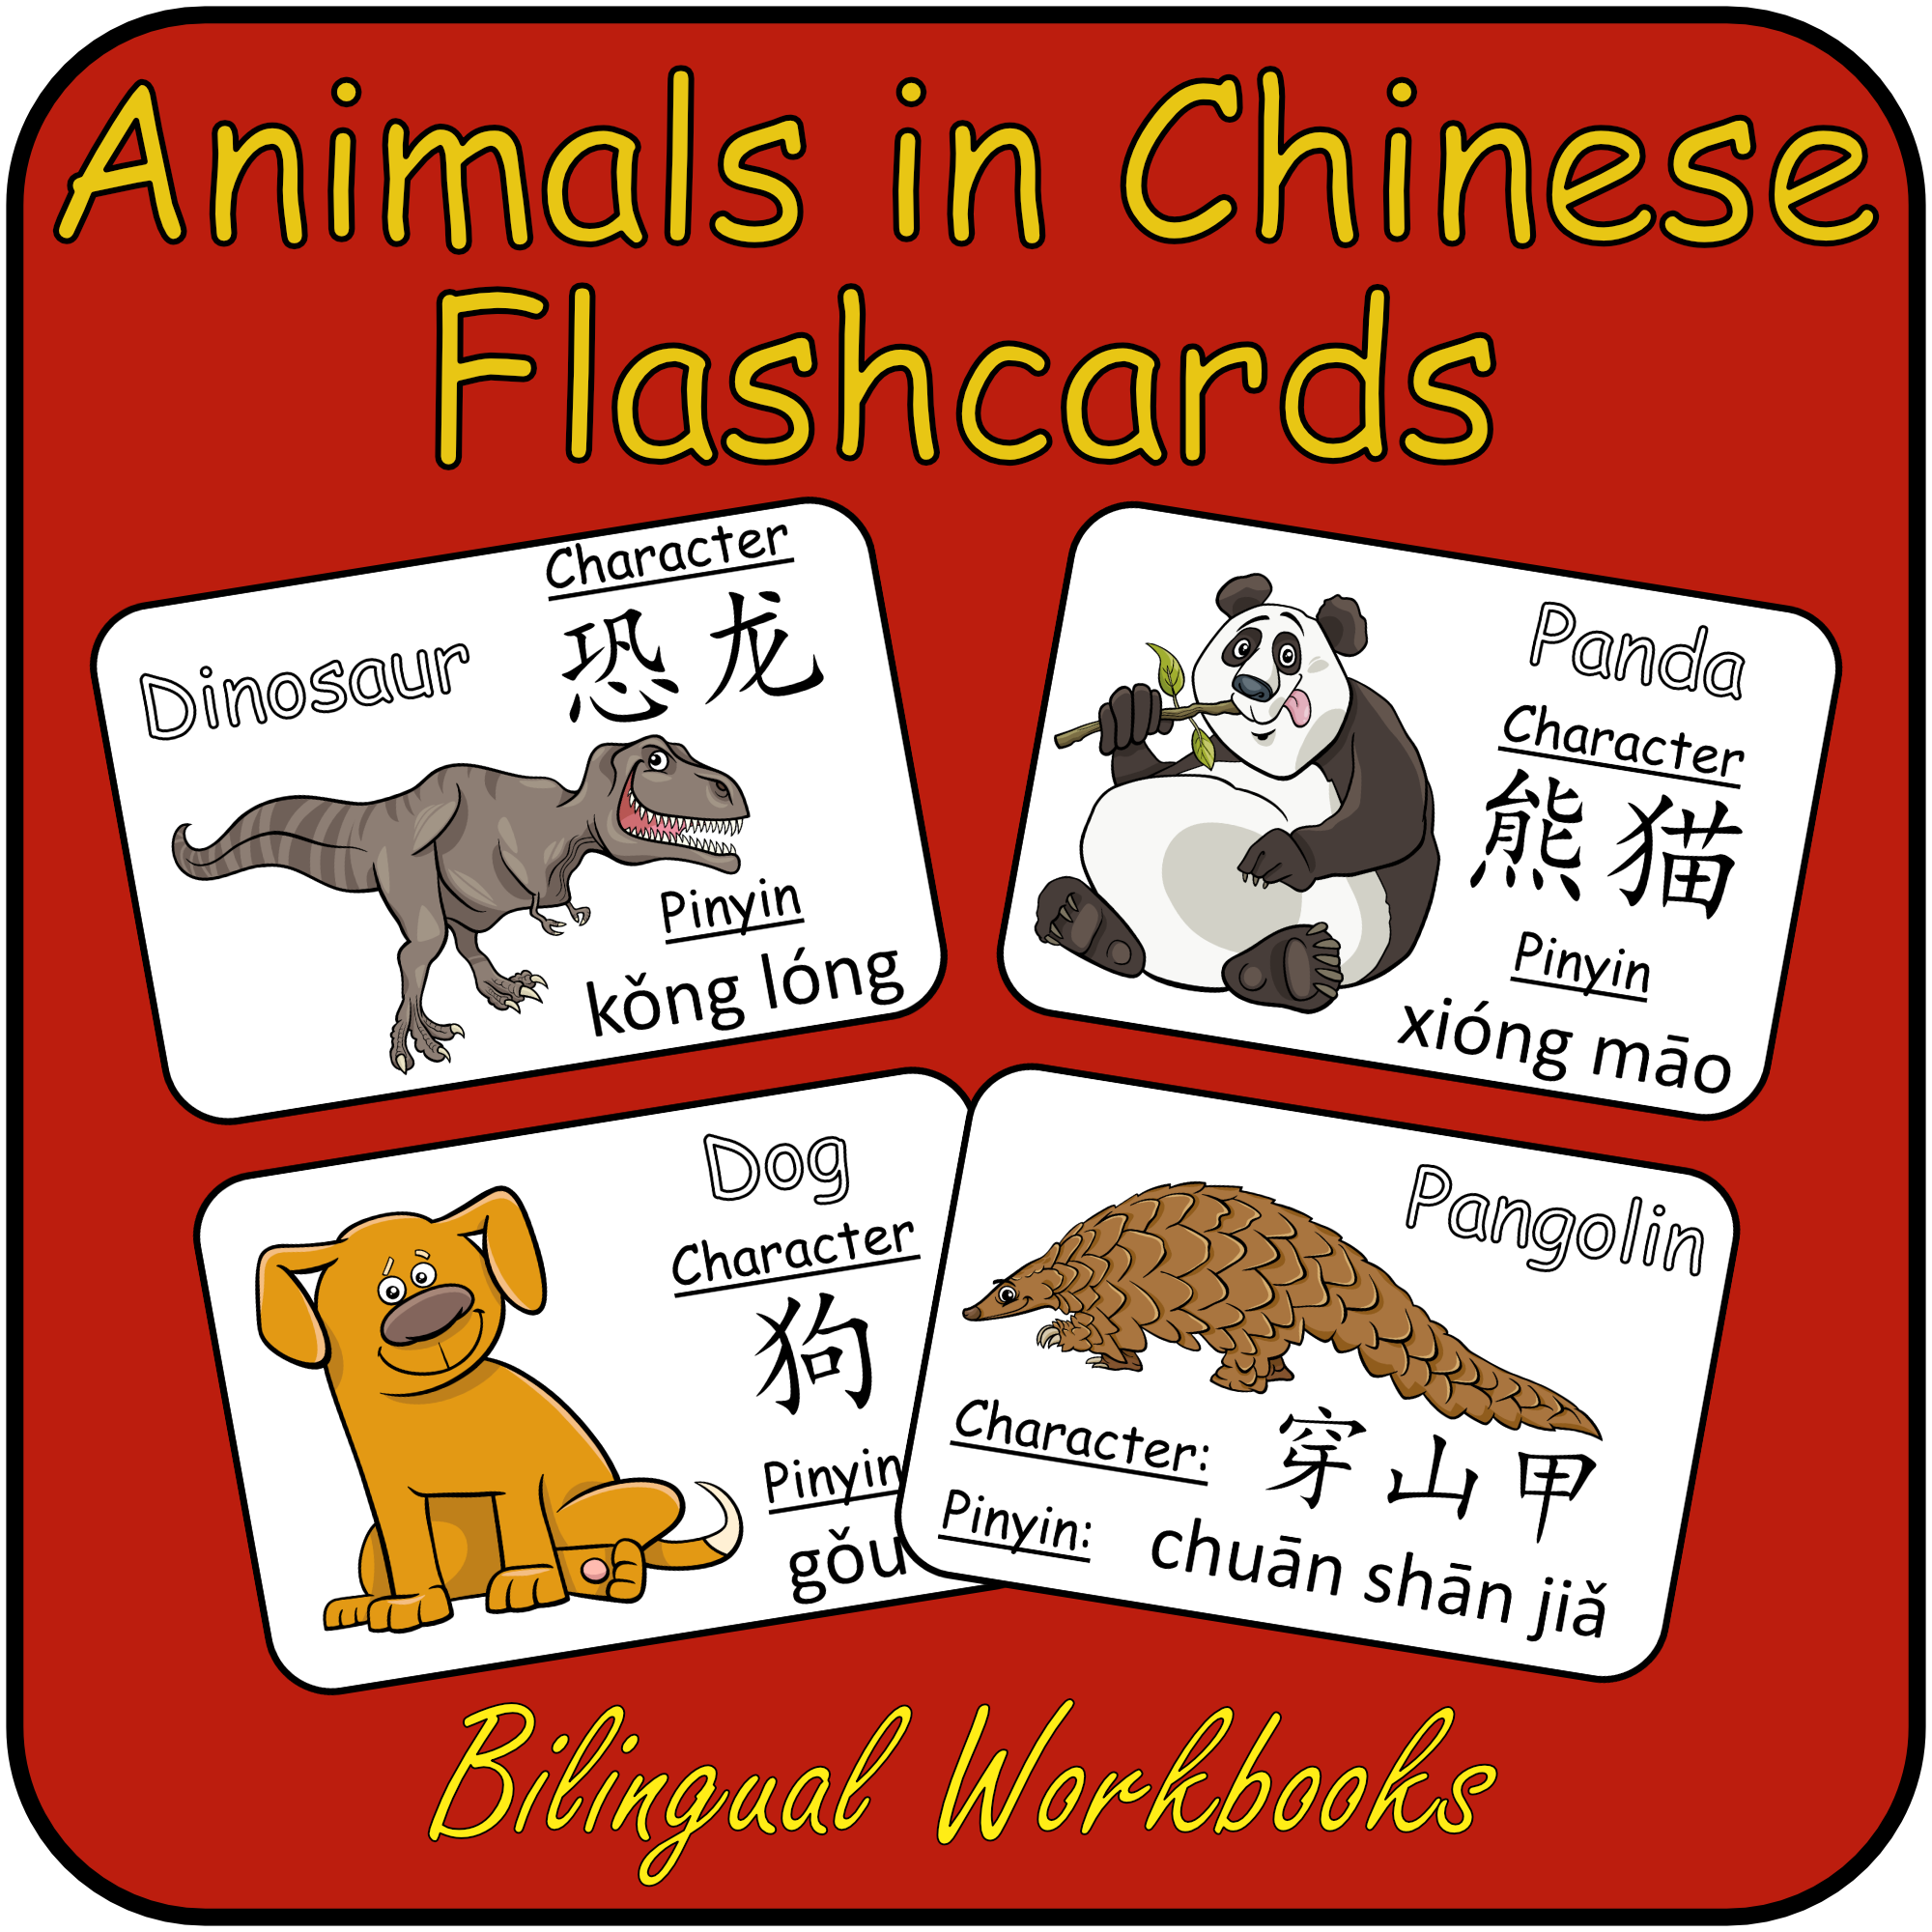 Mandarin Chinese Animals Flashcards - 101 Animal Vocabulary flash cards with English, Chinese Character, Pinyin - Great for all ages & HSK